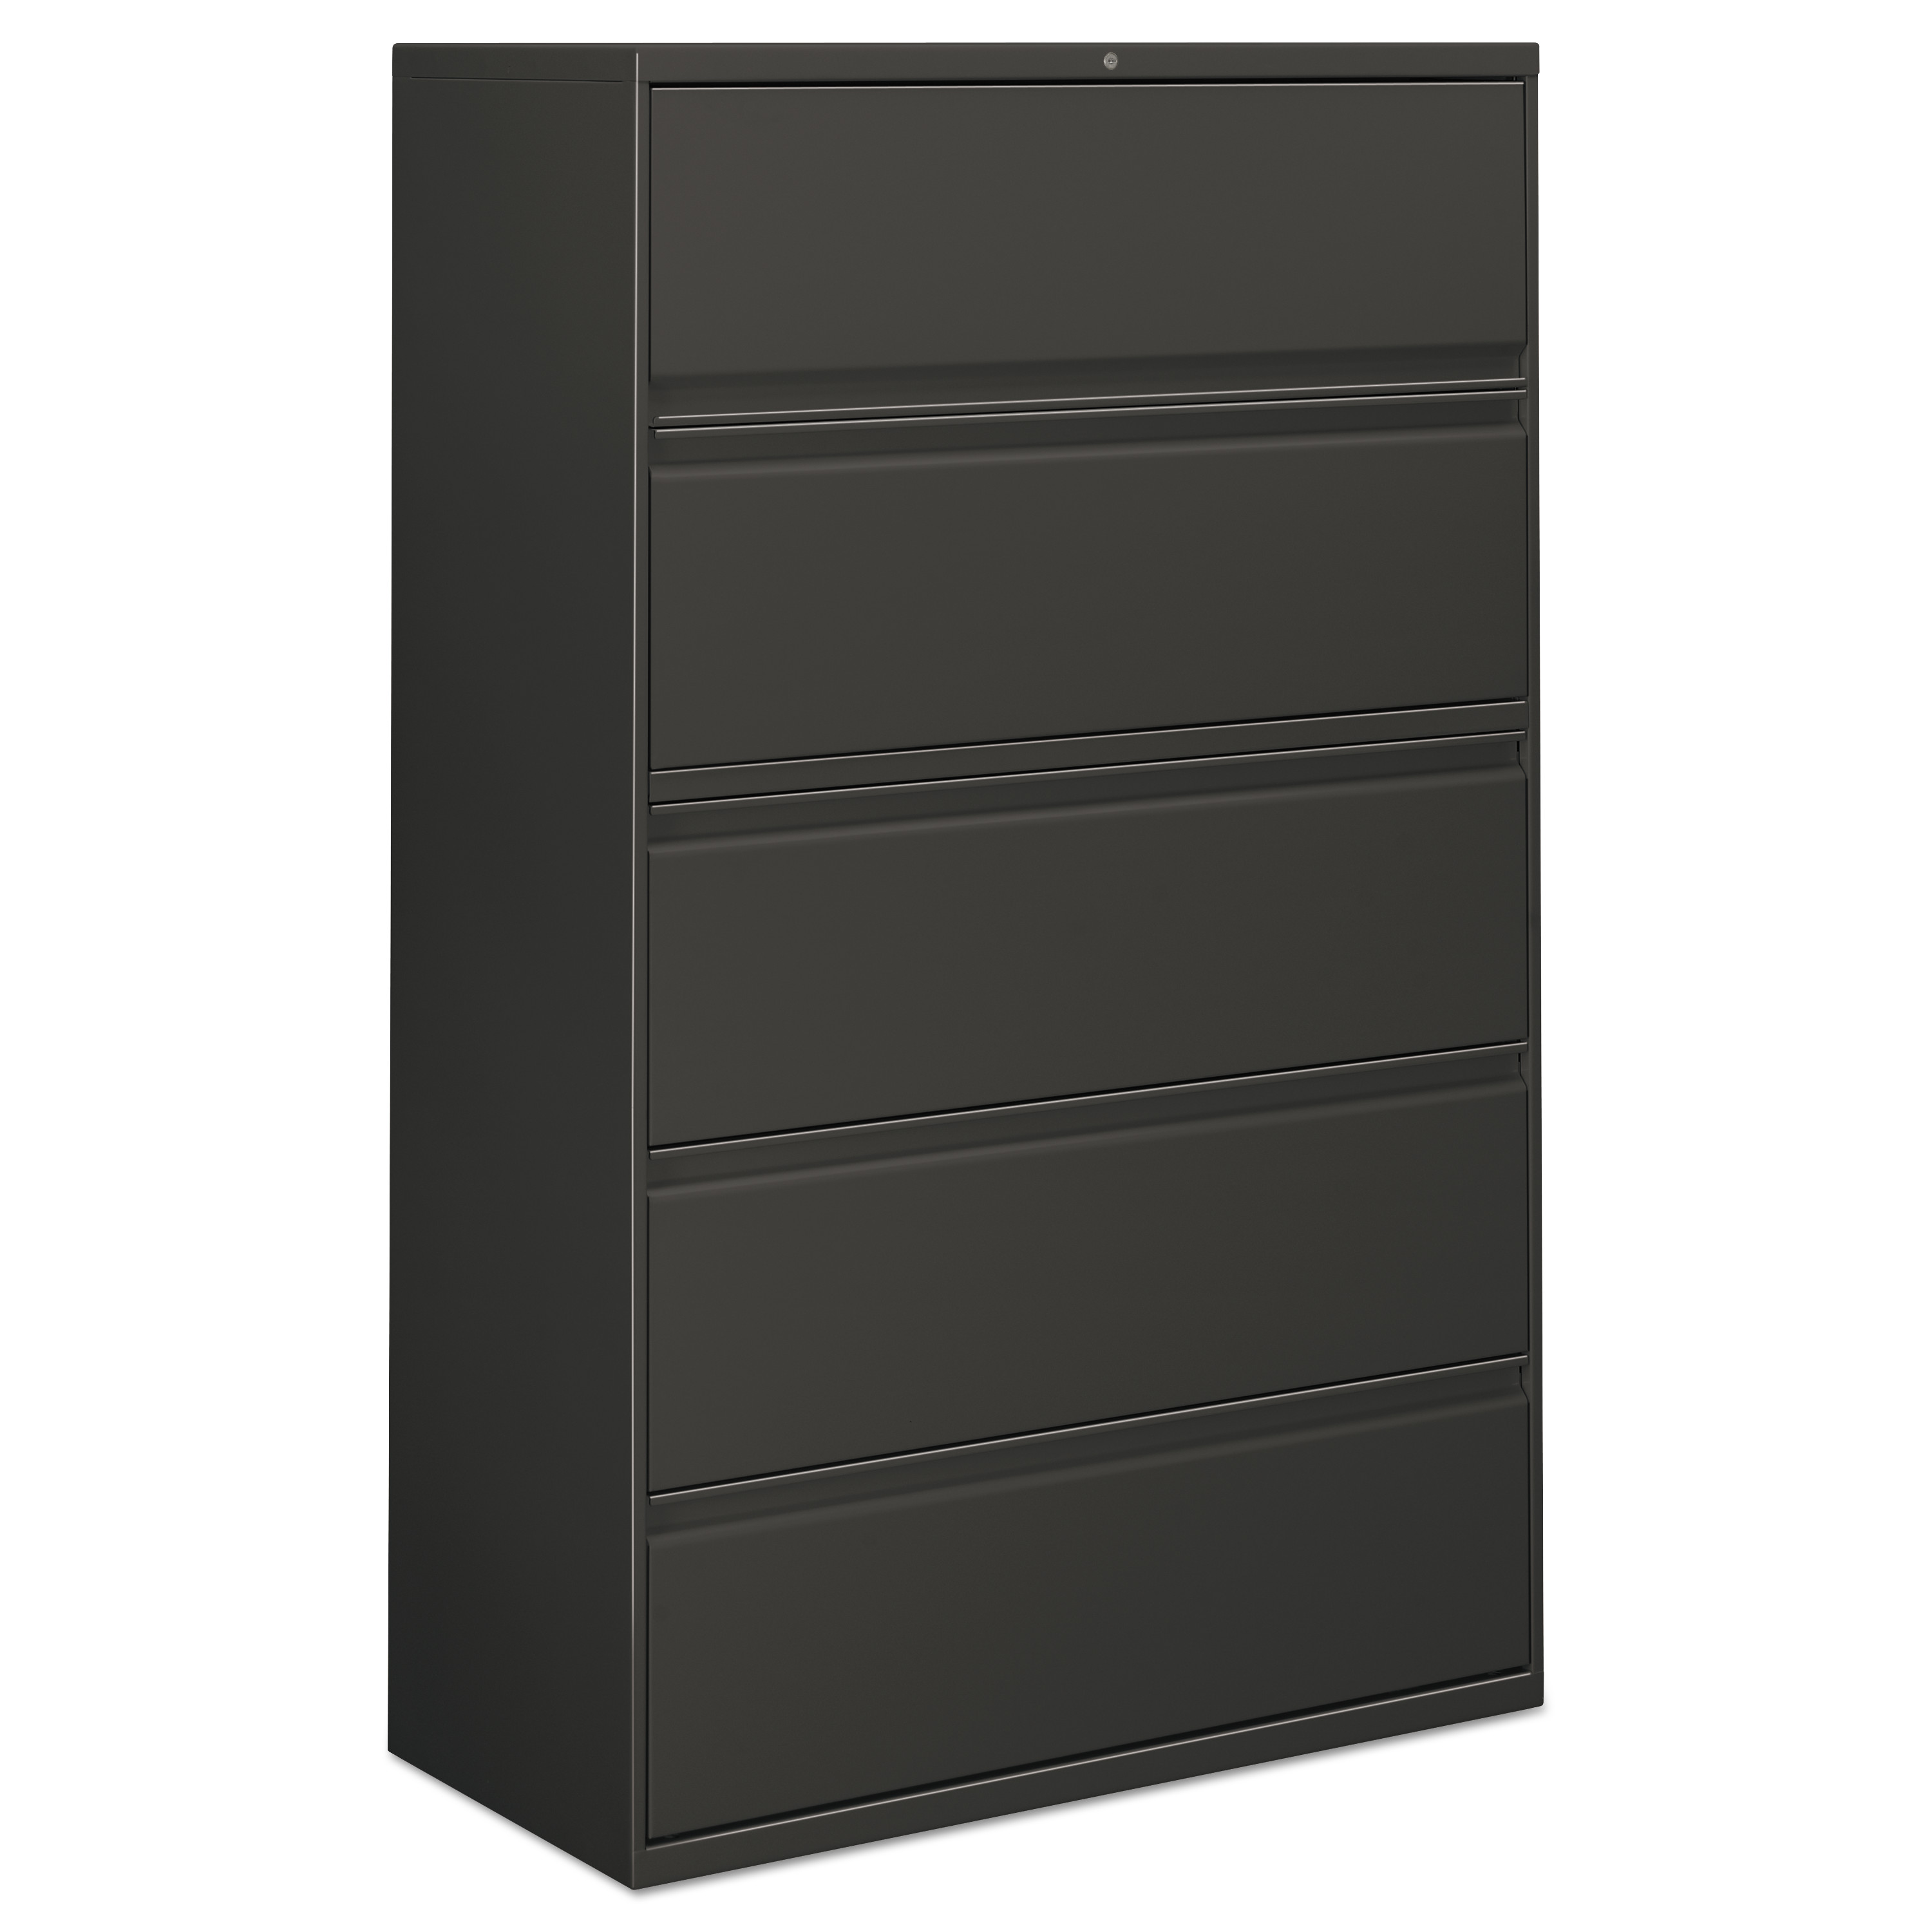 Five-Drawer Lateral File Cabinet, 42w x 18d x 64 1/4h, Charcoal